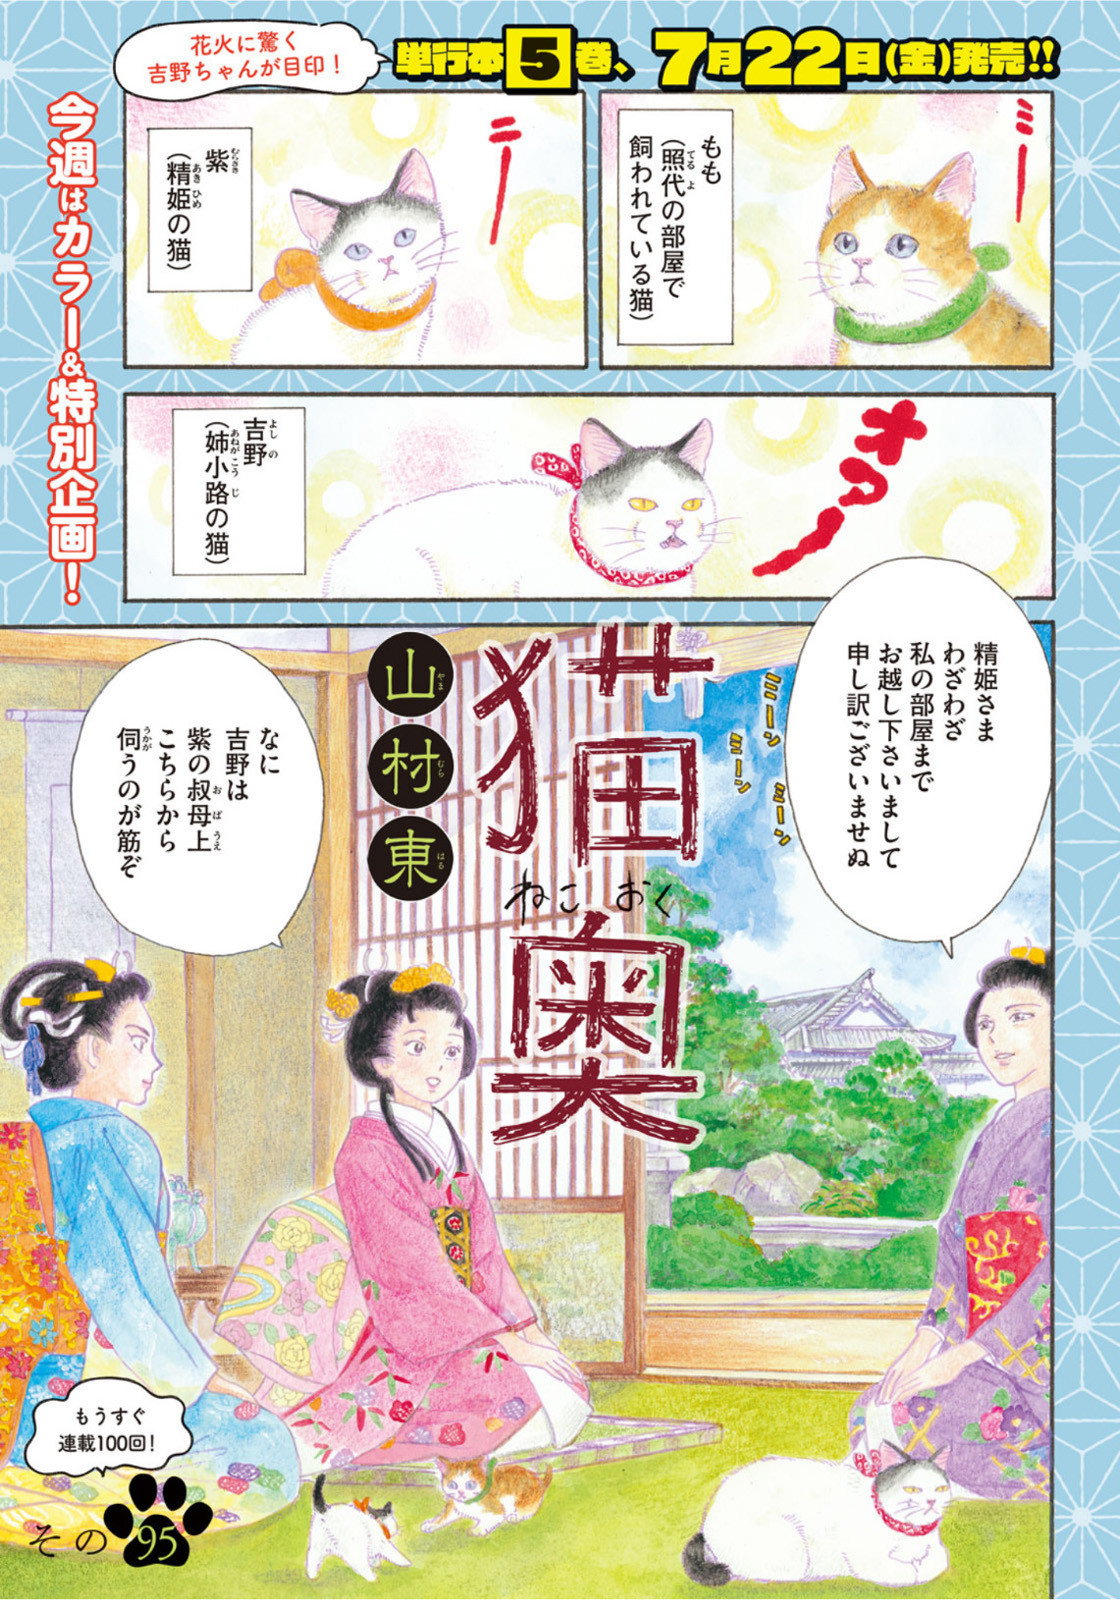 Weekly Morning - 週刊モーニング - Chapter 2022-34 - Page 3